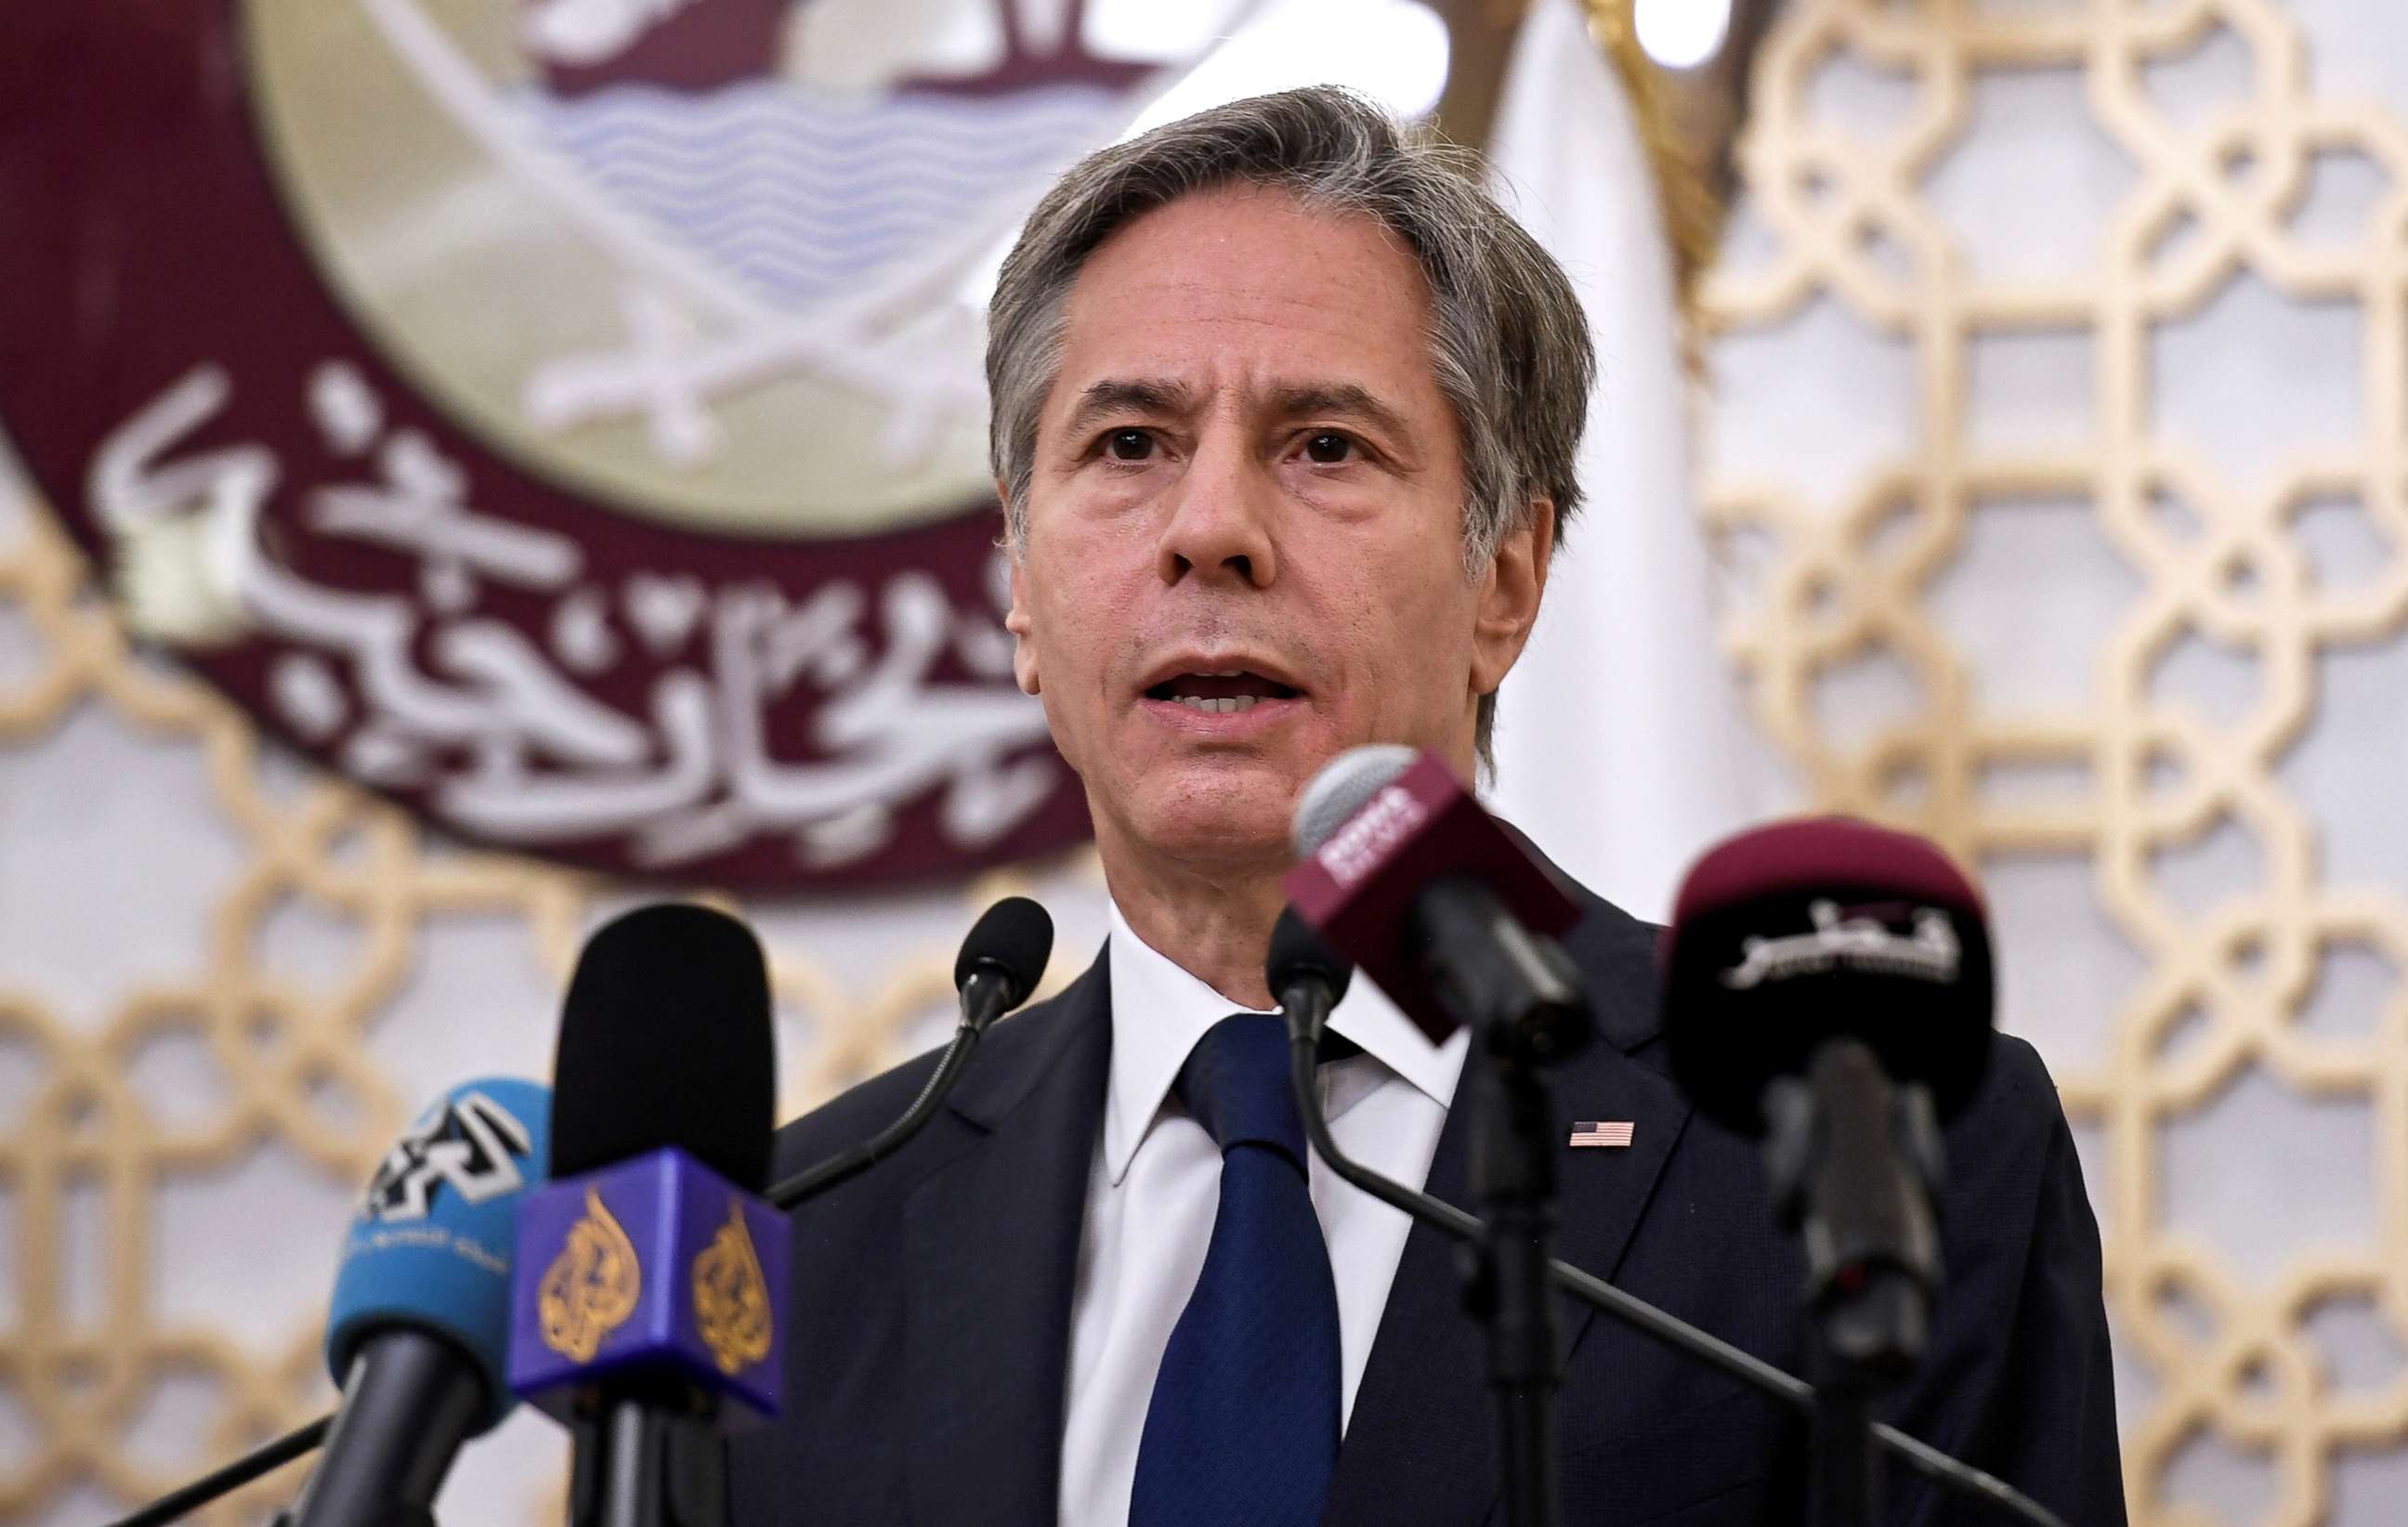 PHOTO: Secretary of State Antony Blinken speaks during a joint news conference at the Ministry of Foreign Affairs in Doha, Qatar, Sept. 7, 2021.